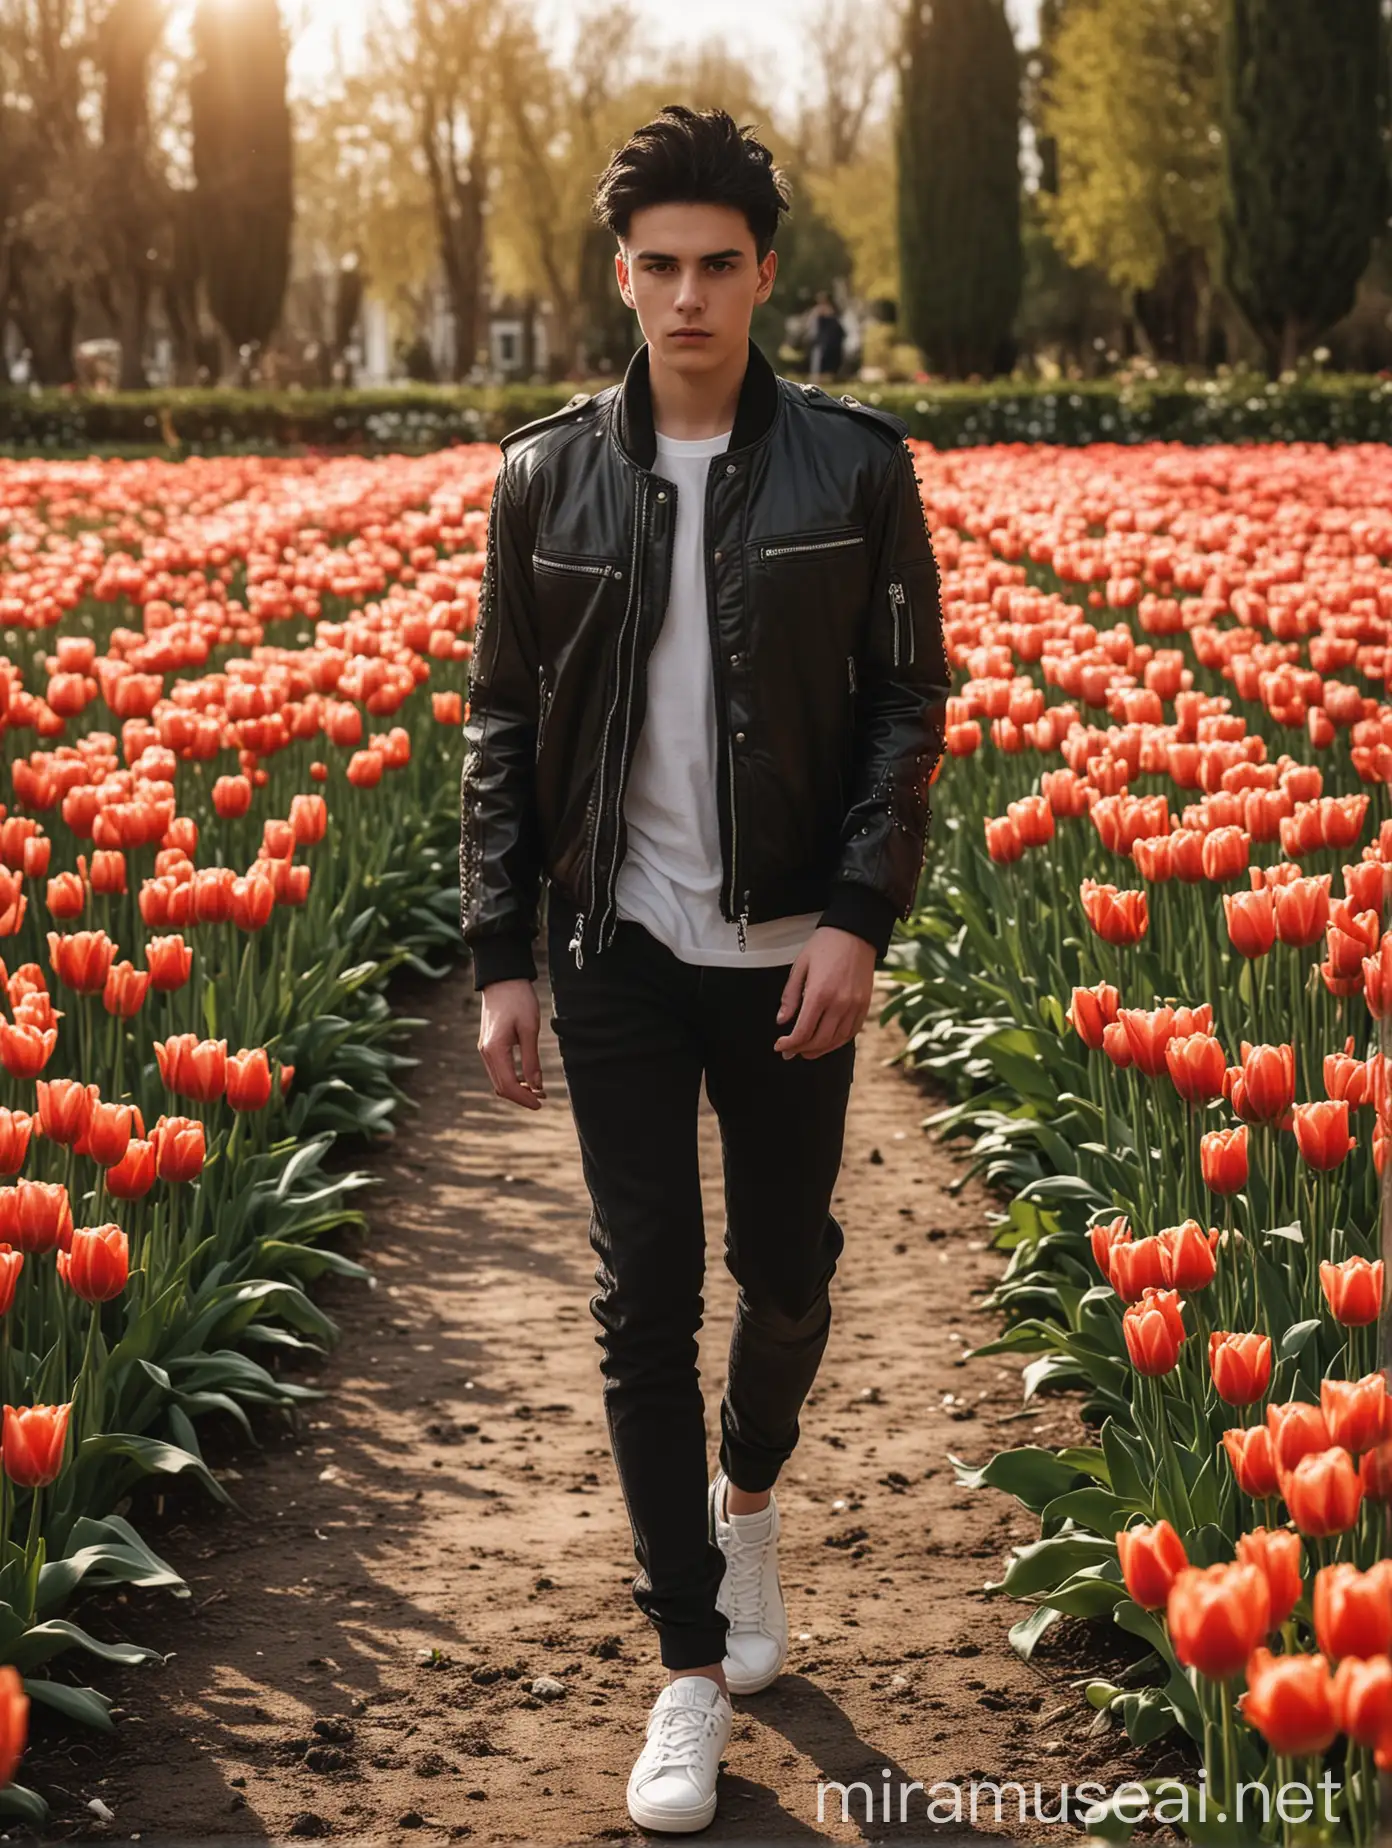 Handsome Young Man Walking in Tulip Garden at Sunset